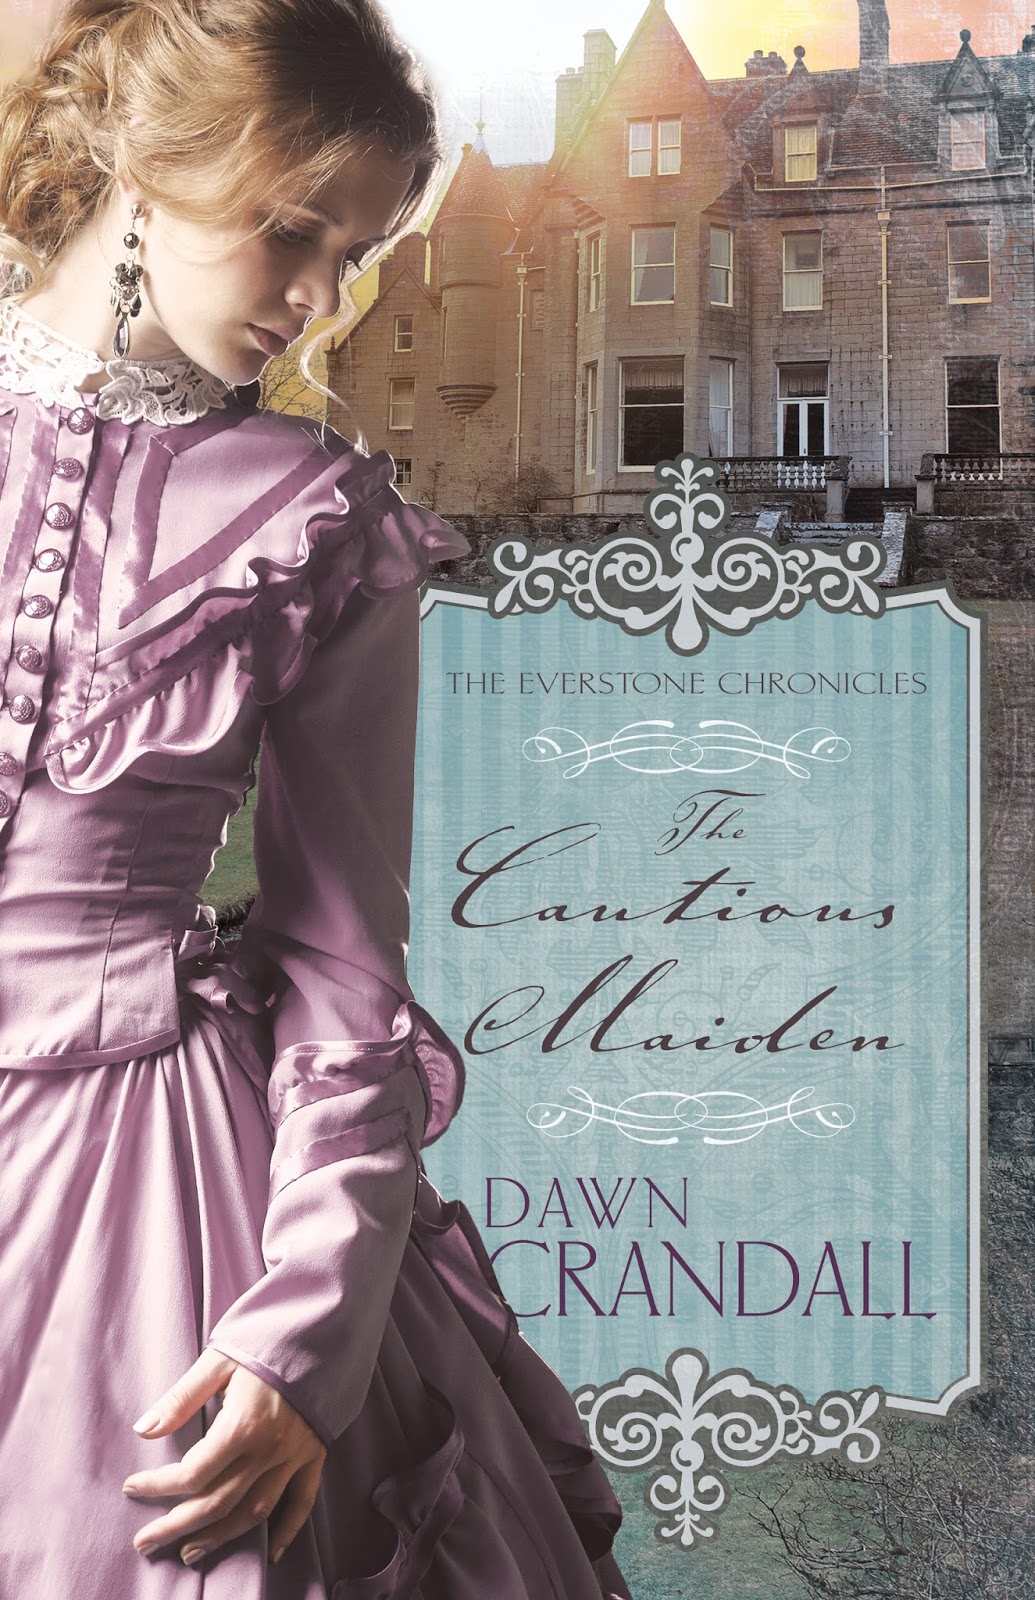 The Cautious Maiden by Dawn Crandall